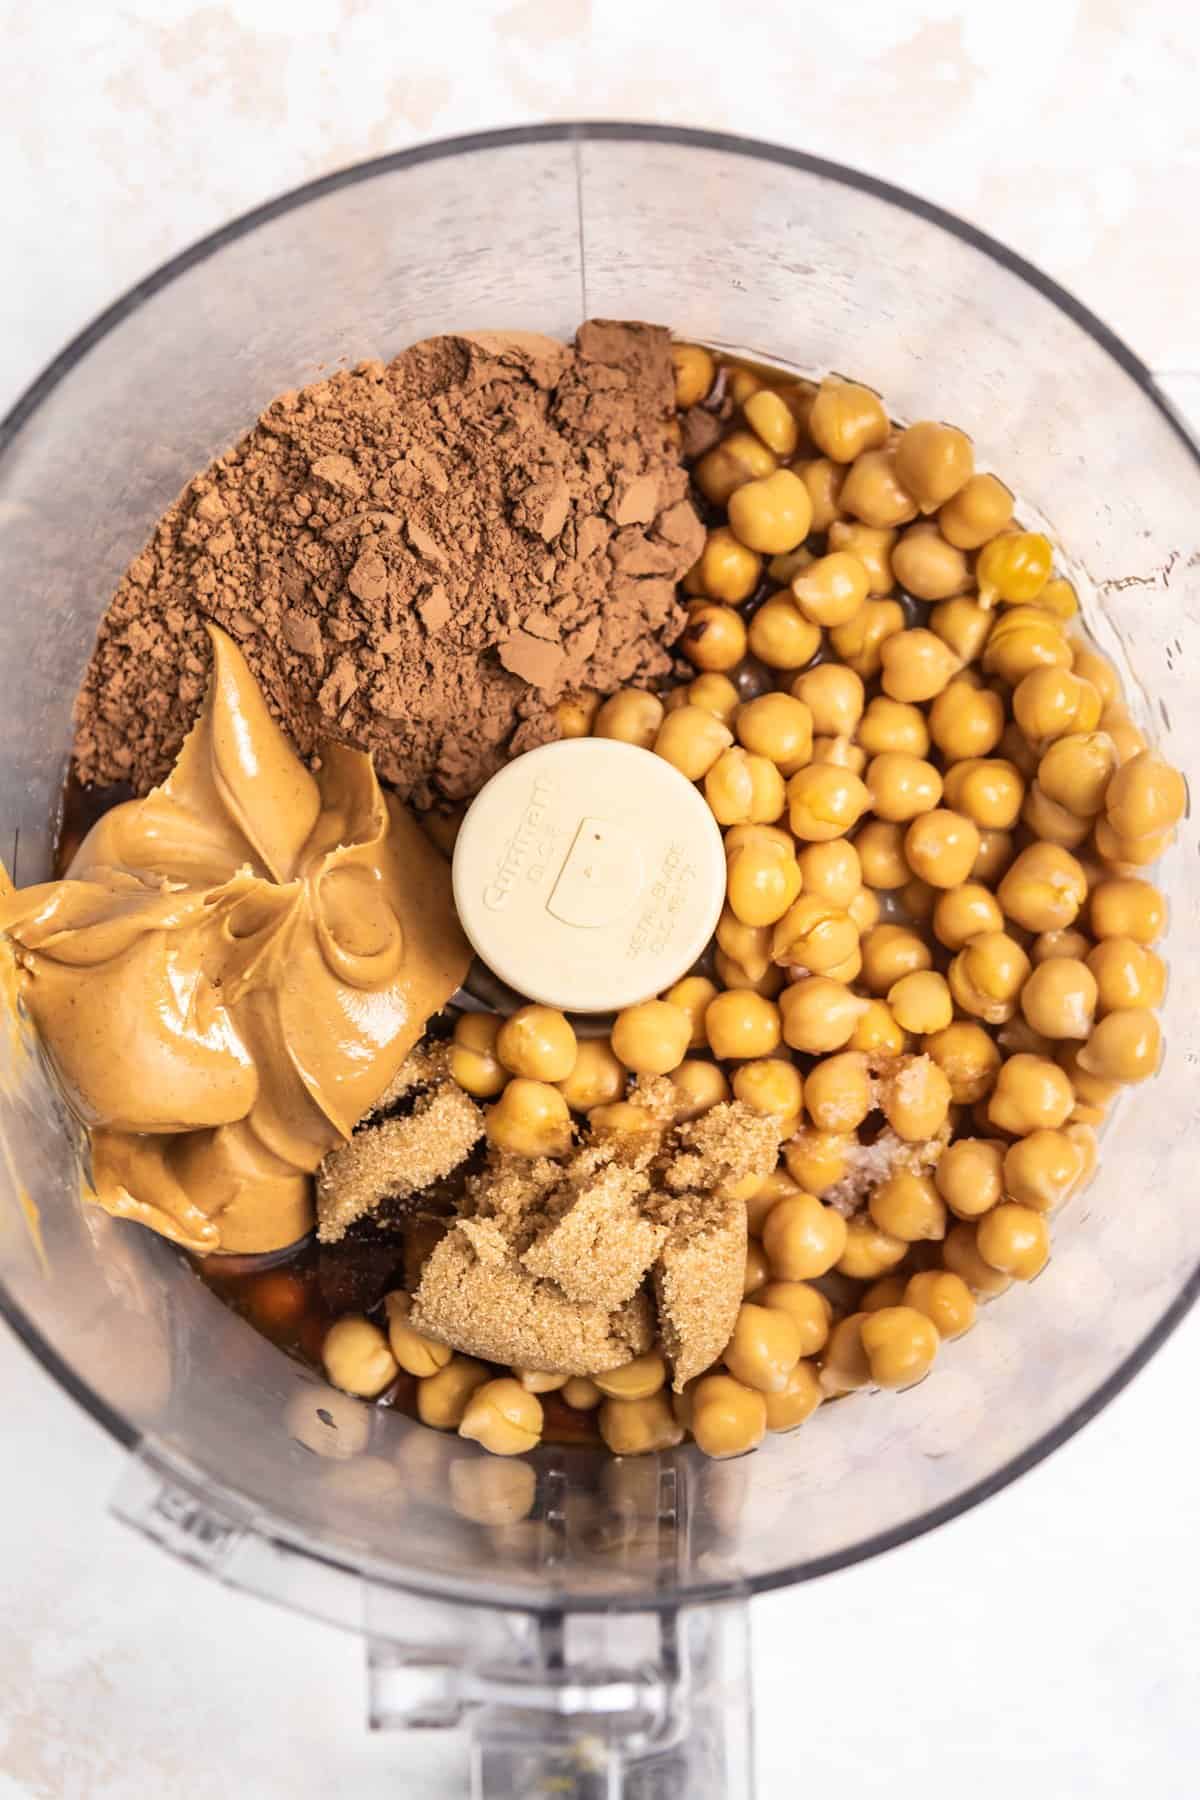 Garbanzo beans, cocoa powder, peanut butter, maple and other ingredients in food processor.